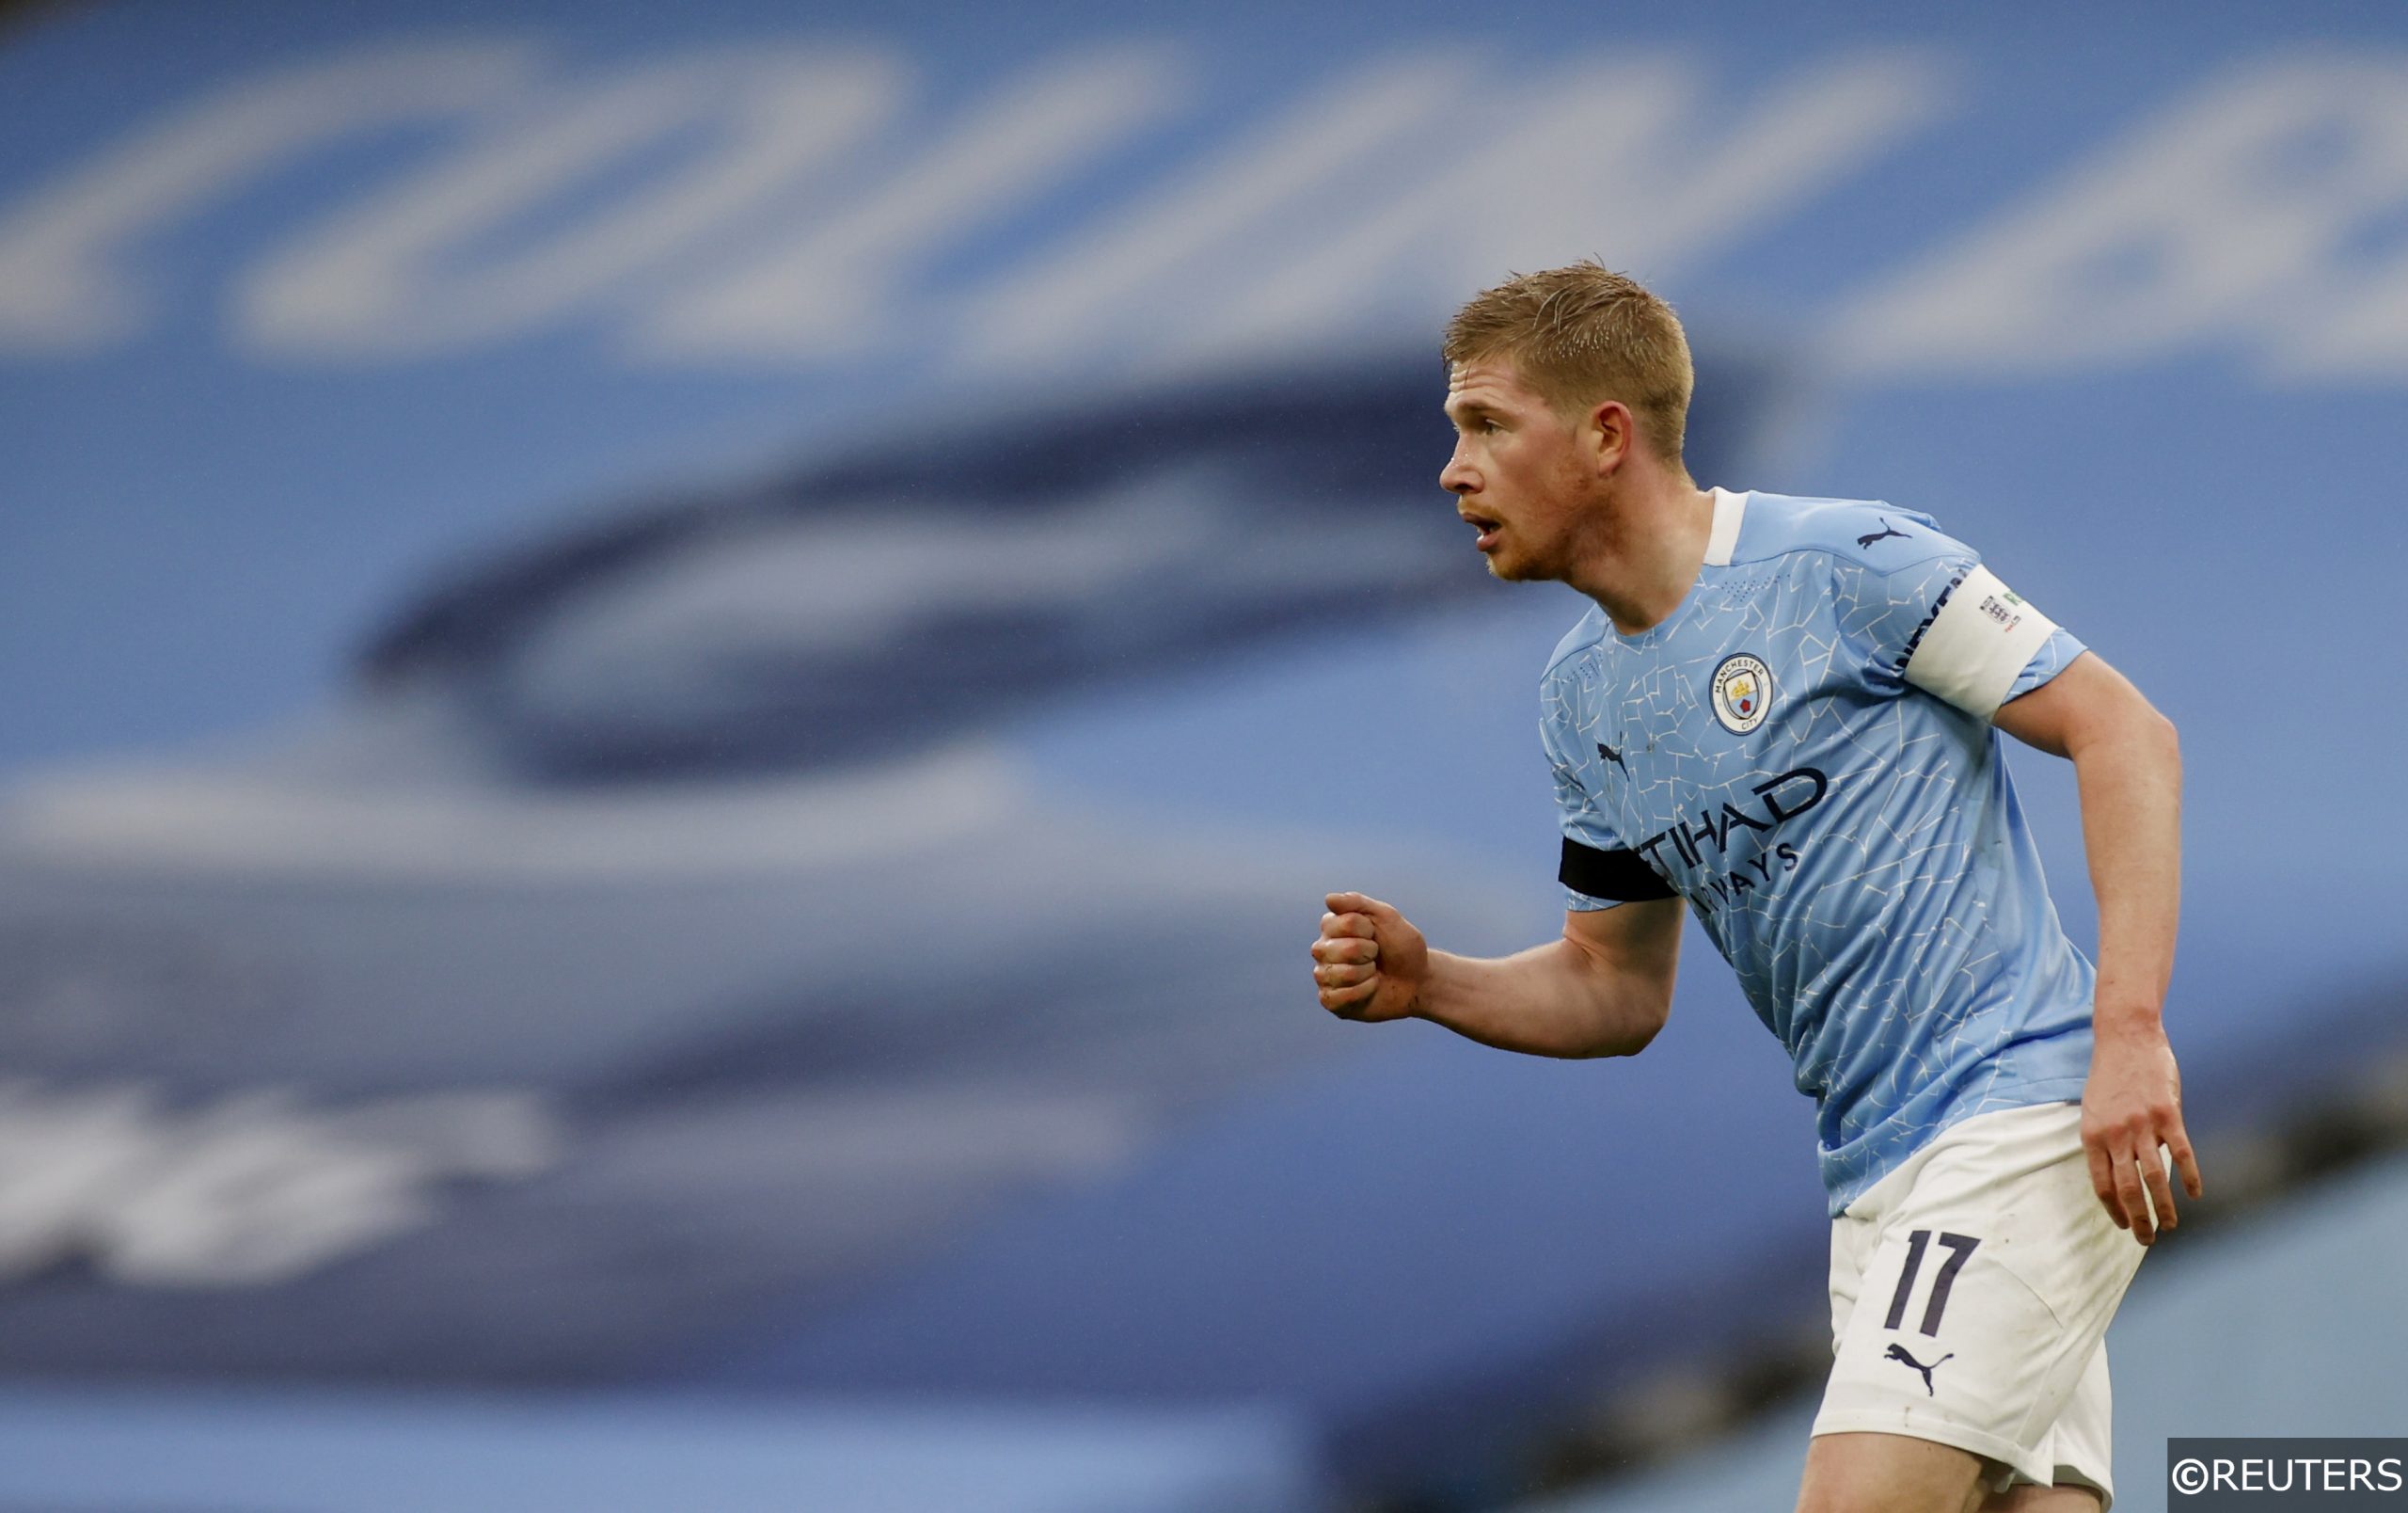 COMPLIANT - Kevin De Bruyne for Man City in the FA Cup